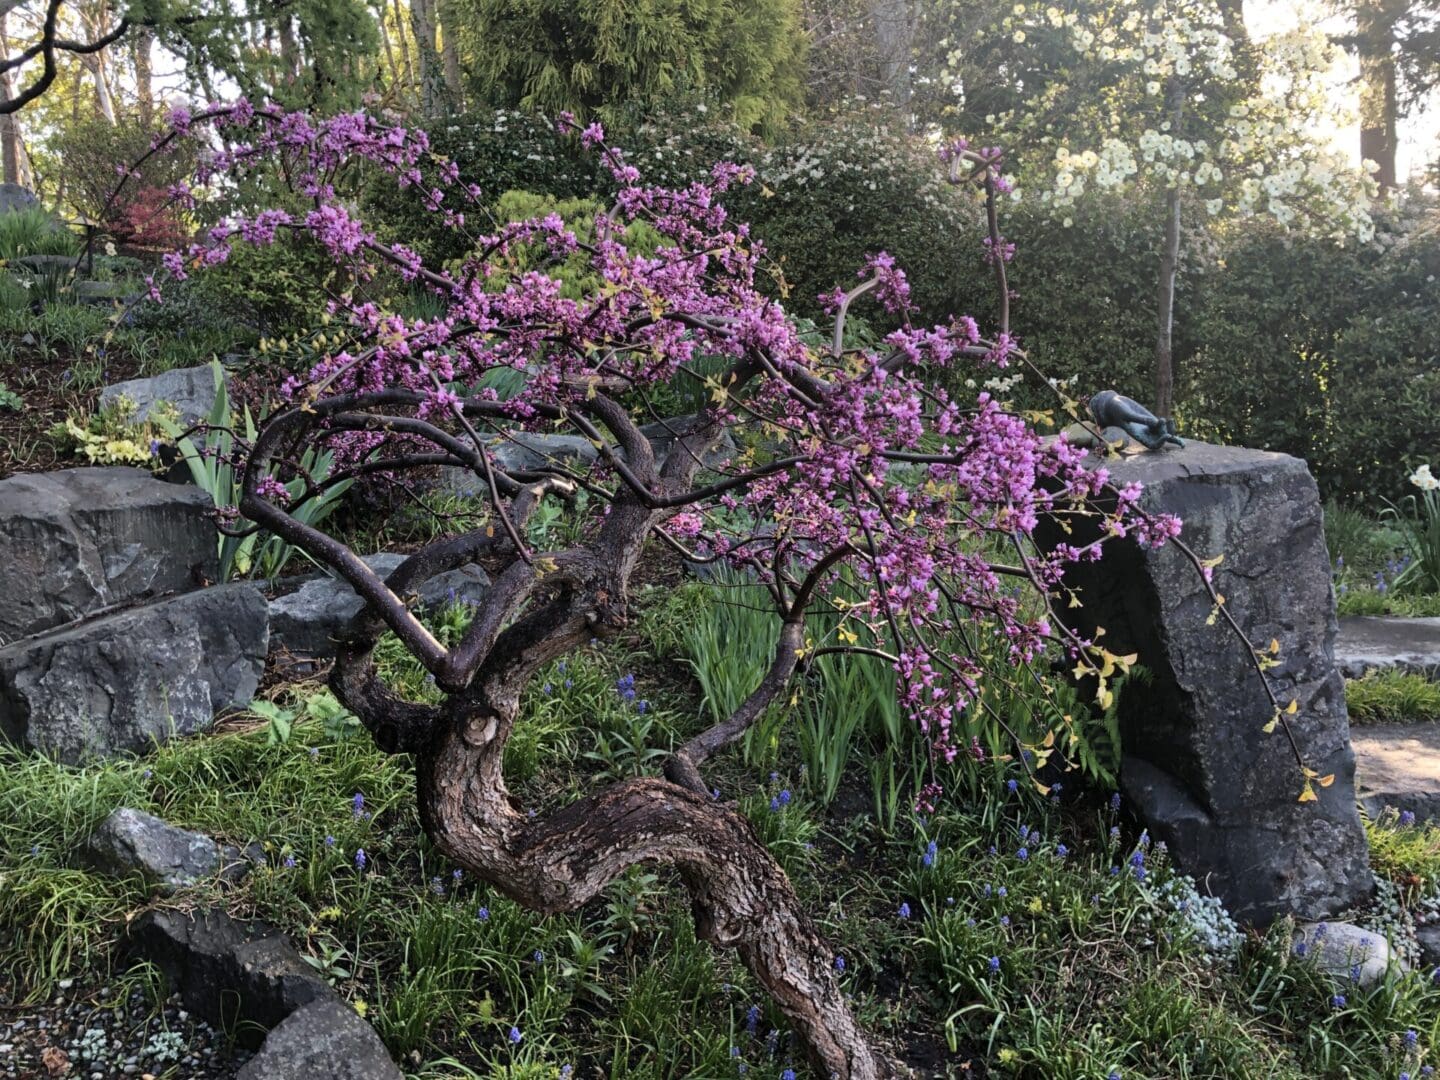 A tree with purple flowers growing on it